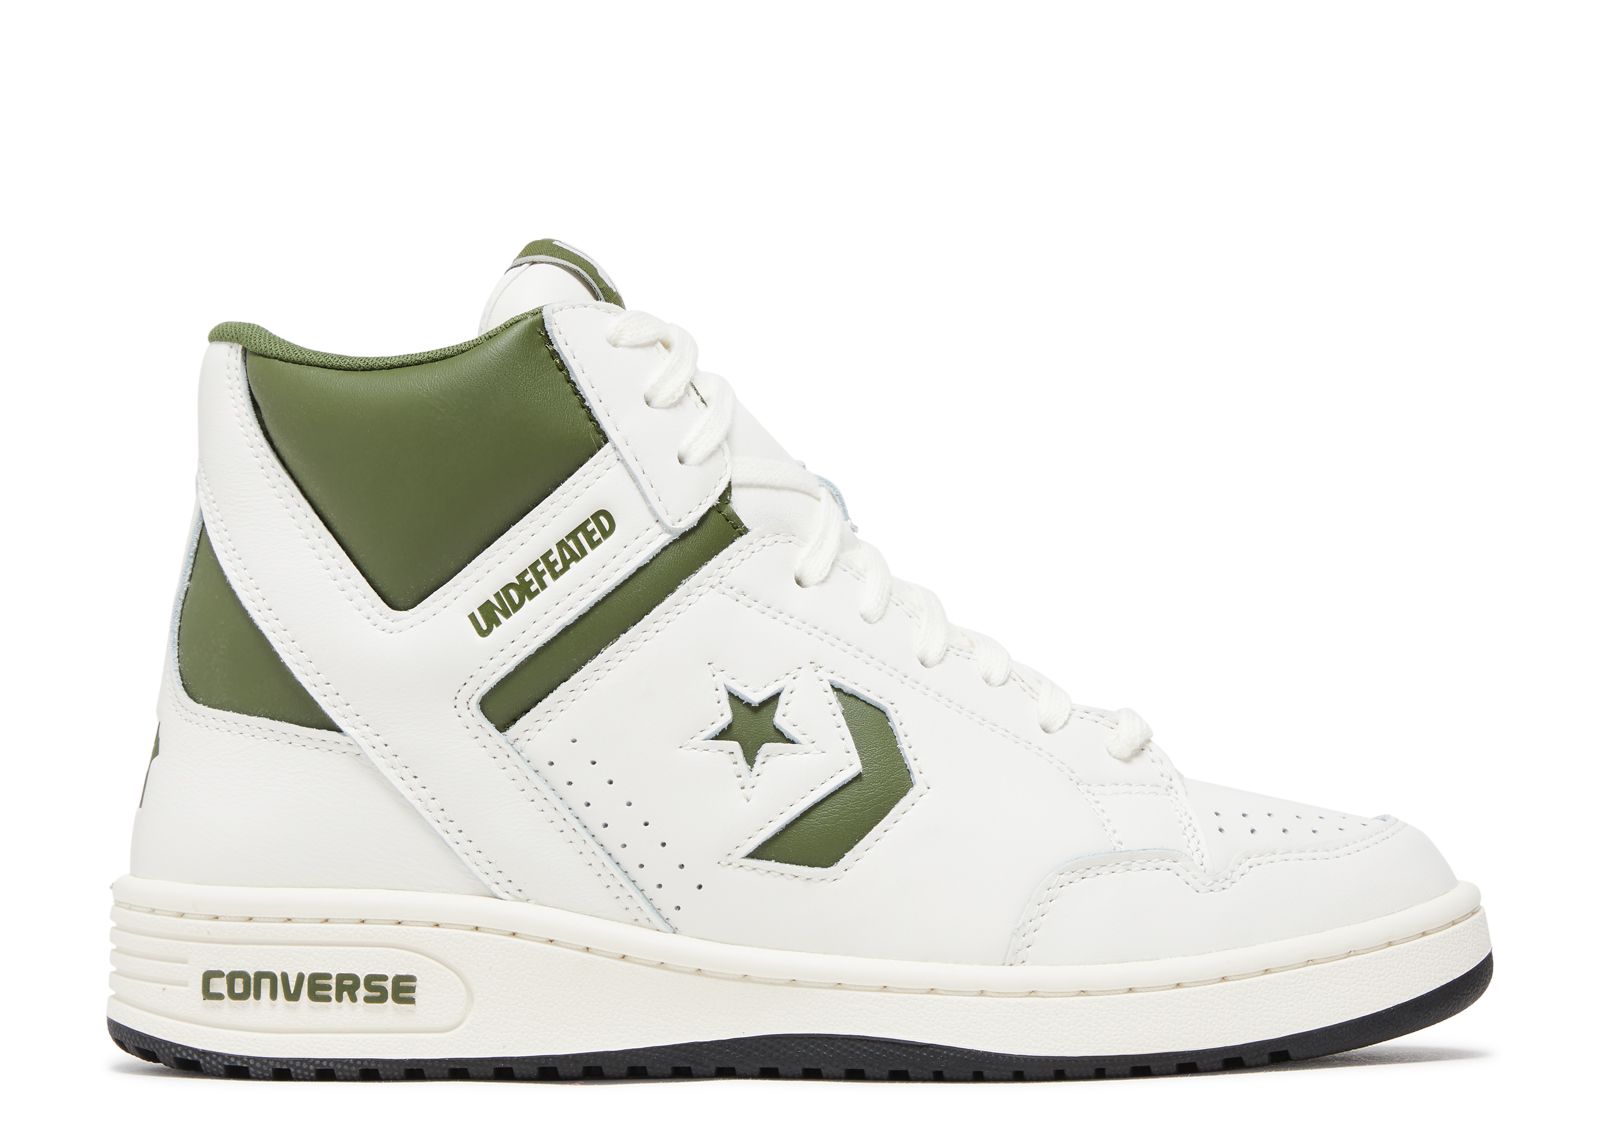 Кроссовки Converse Undefeated X Weapon High 'Chive', белый